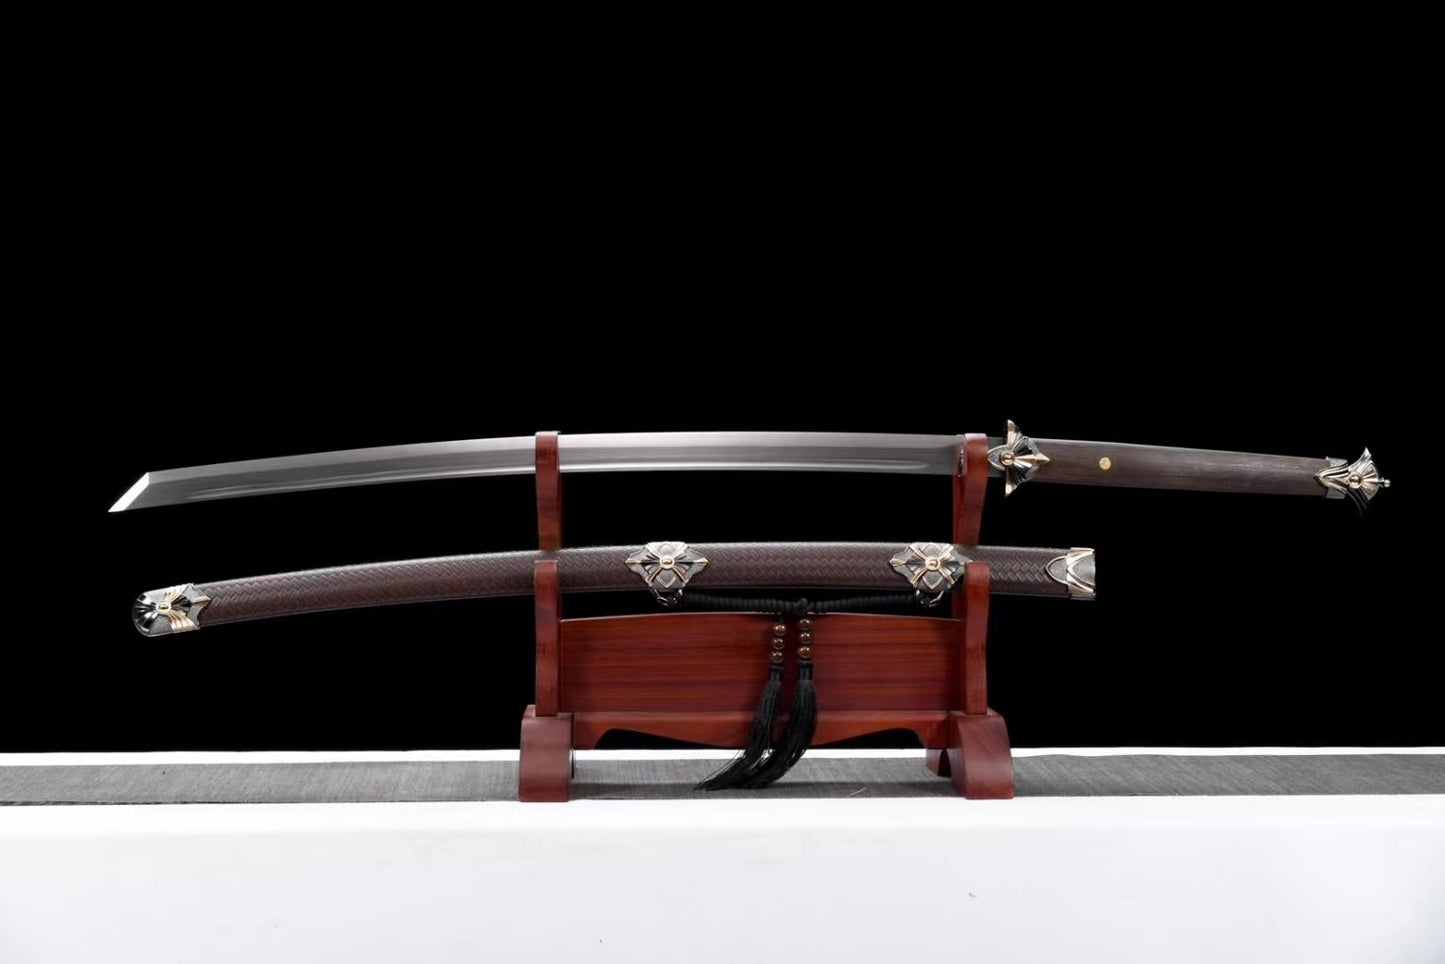 High Carbon Steel Chinese Tang Sword, Handcrafted Traditional Blade, Faux Leather-Wrapped Scabbard